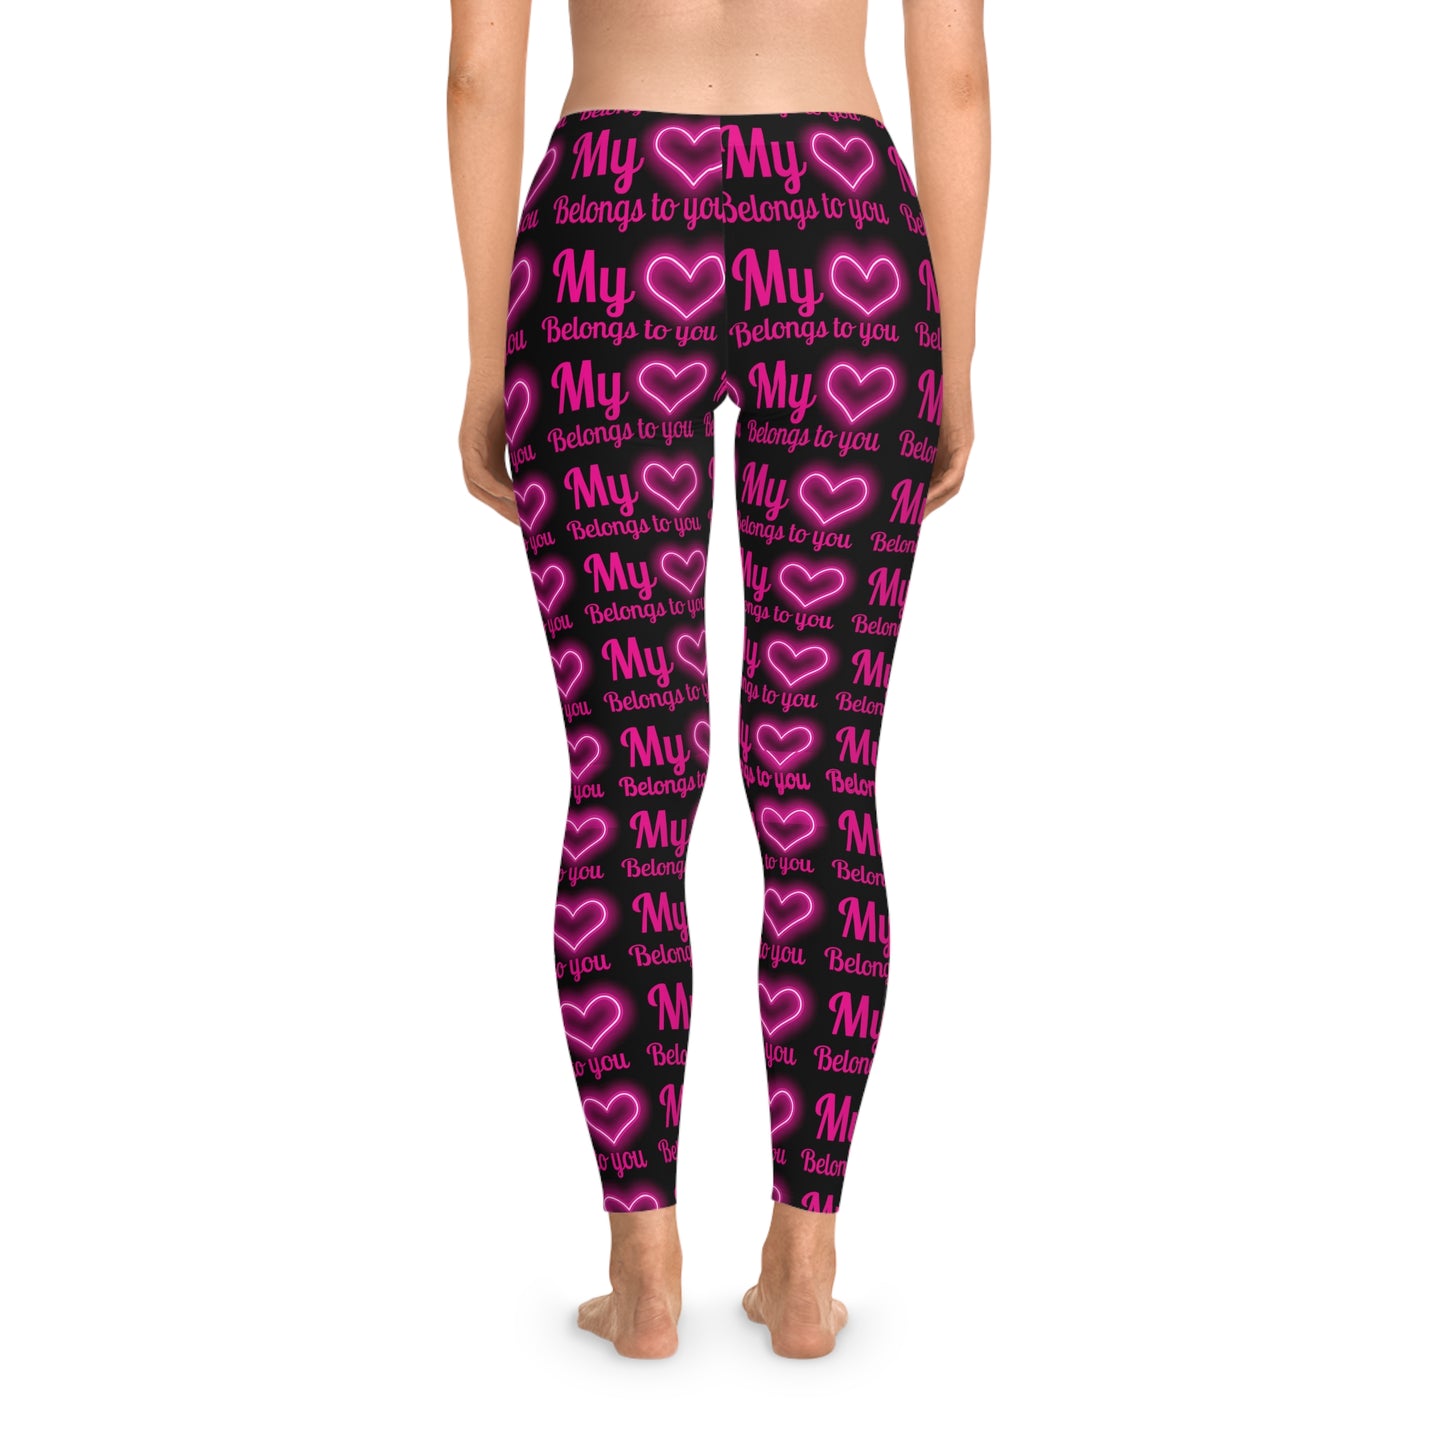 My Heart Belongs To You, Stretchy Leggings, Valentines Day Gift, Gift For Her, Black Leggings